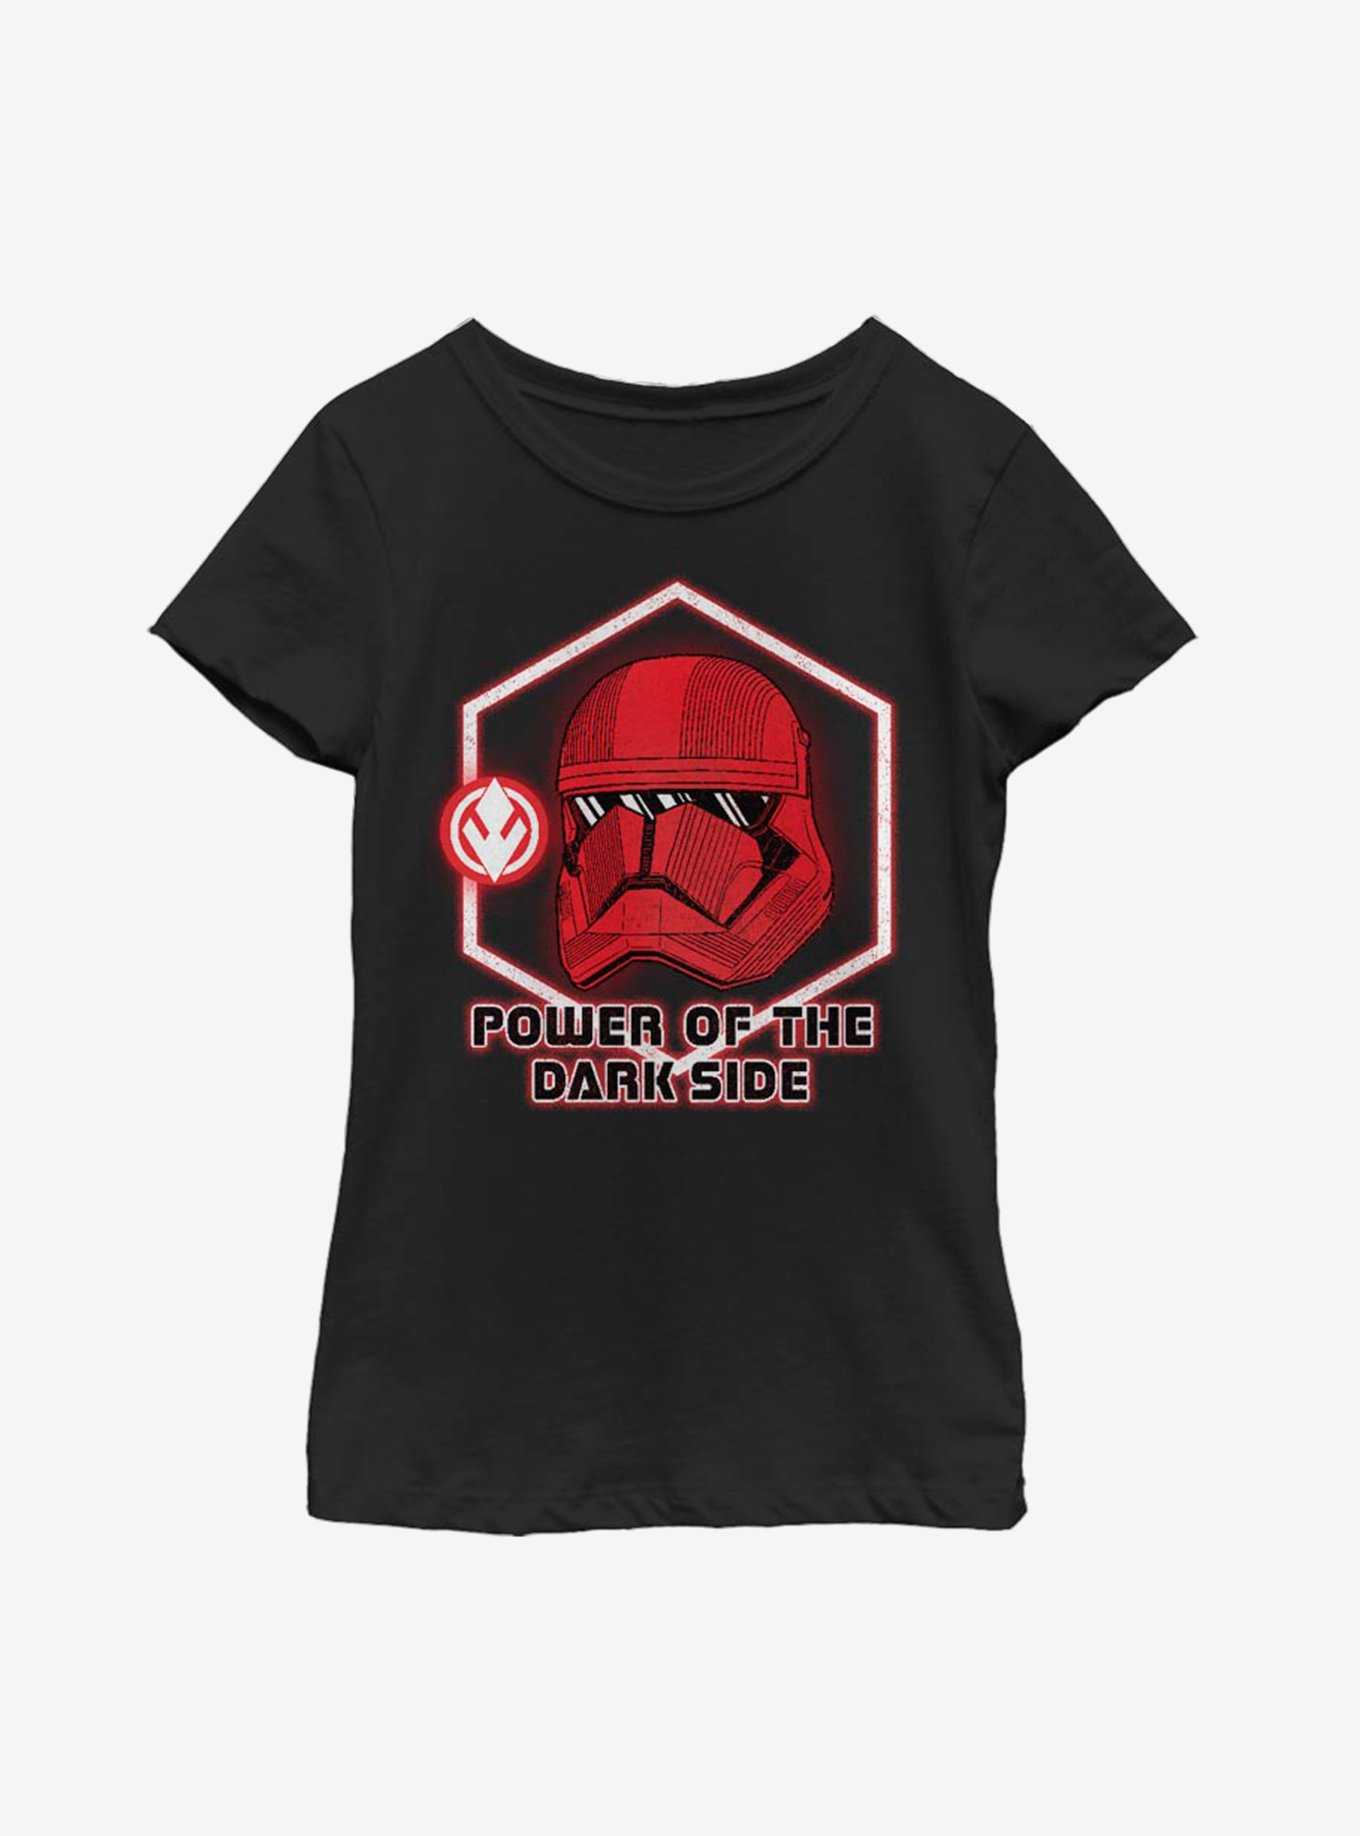 Star Wars Episode IX The Rise Of Skywalker Power of the Dark Side Youth Girls T-Shirt, , hi-res